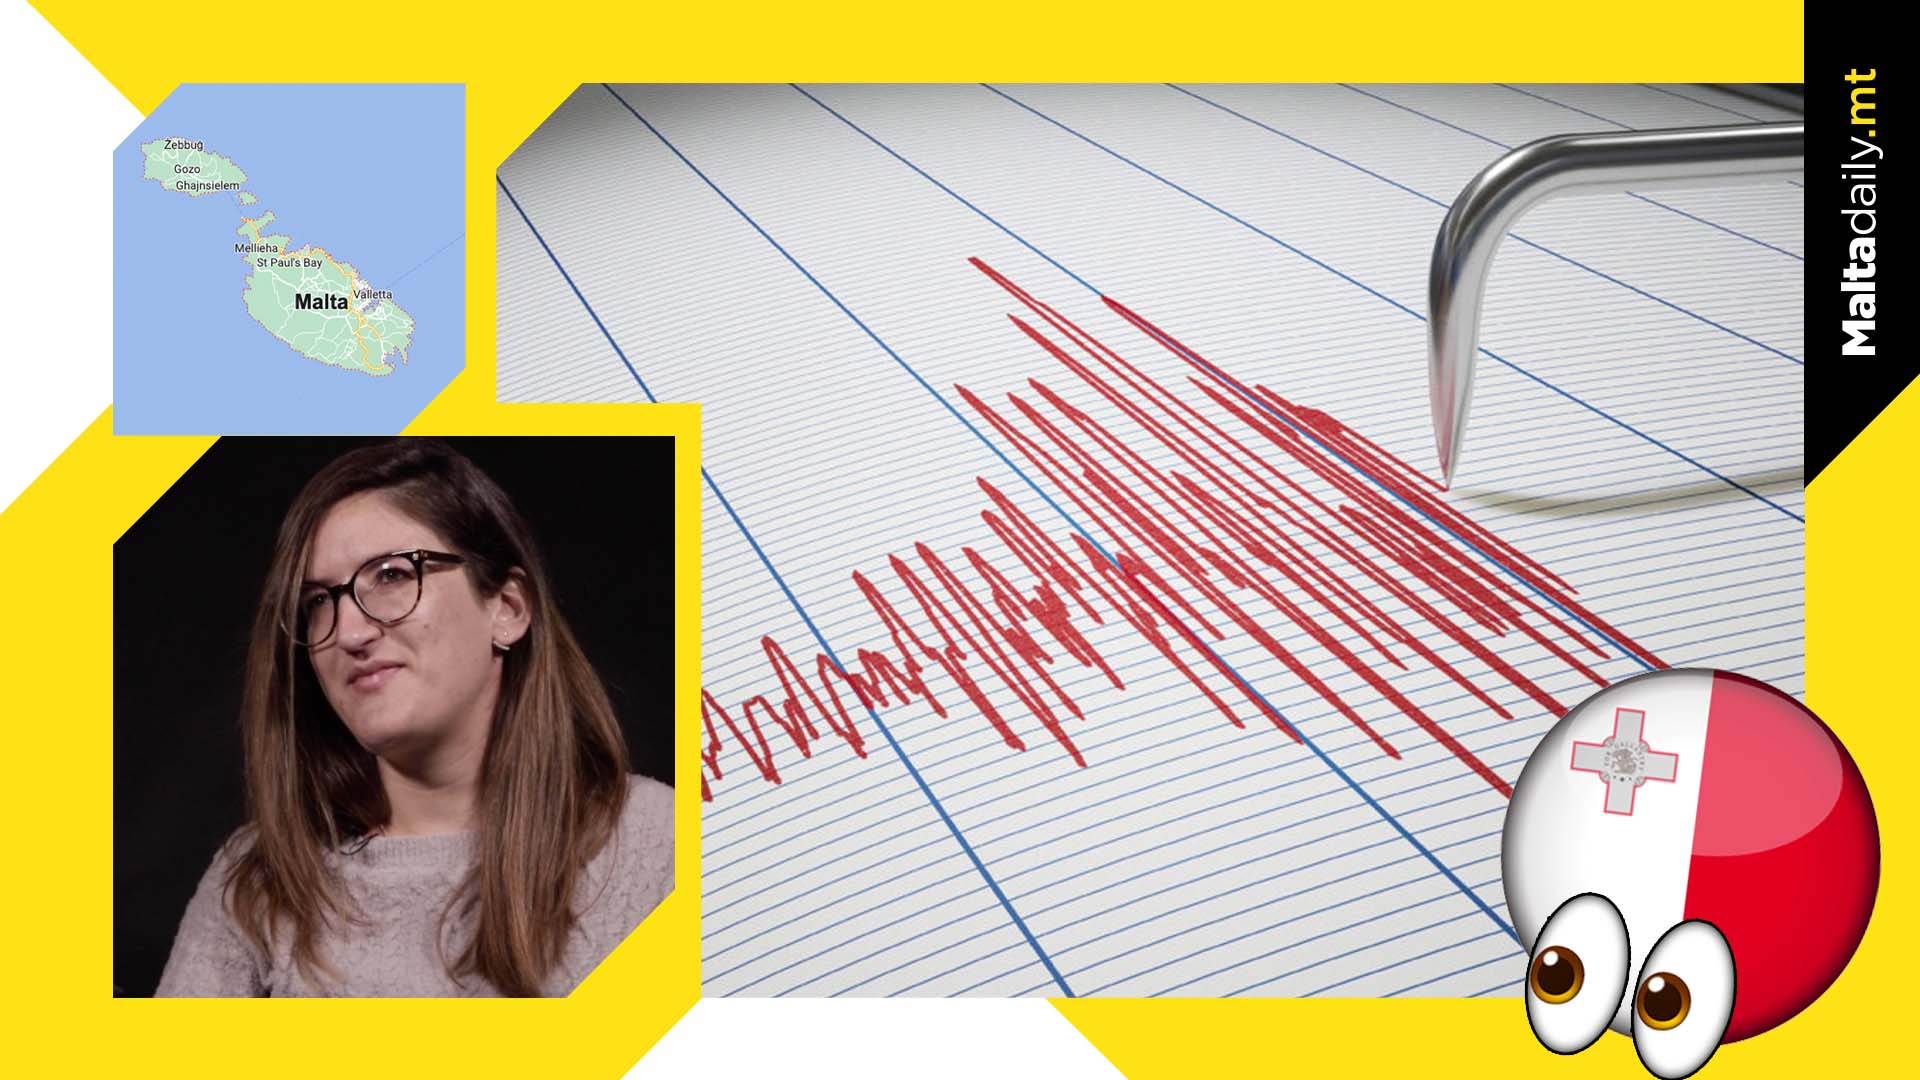 Over 100 earthquakes registered in Malta in just 8 days